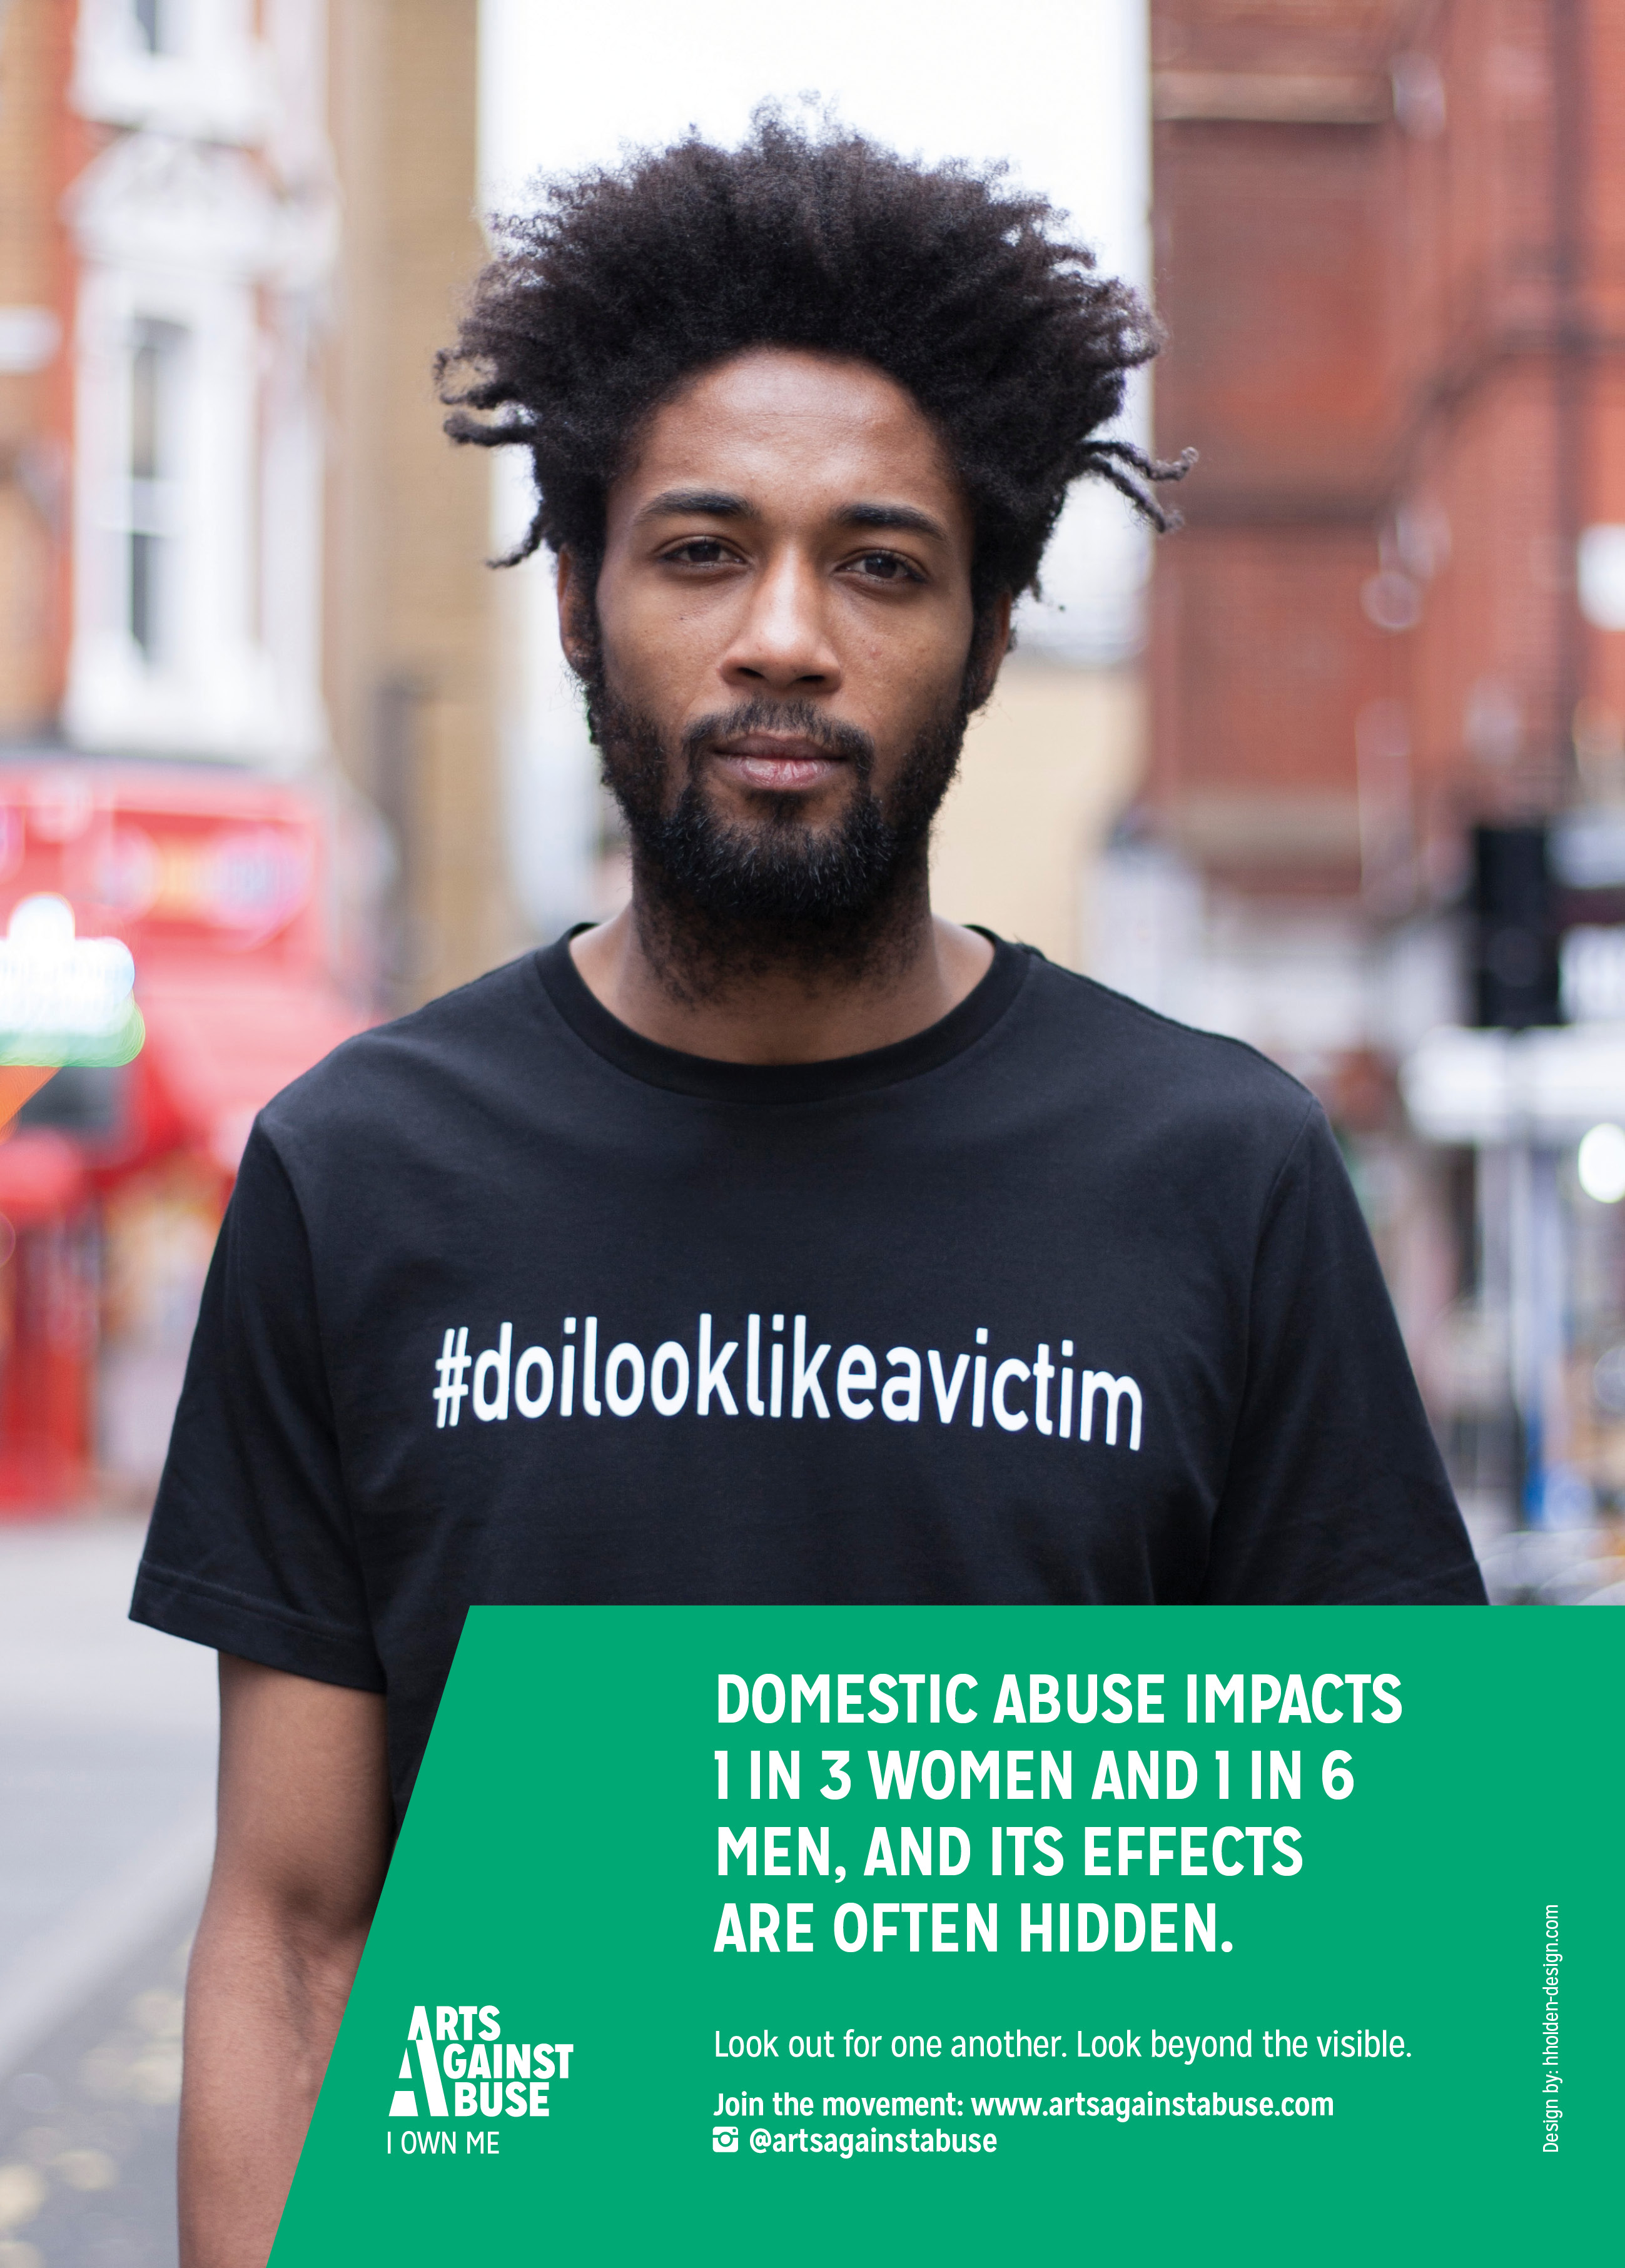 A photograph shows a man wearing a t shirt with the hashtag do i look like a victim and a text box that reads 'domestic abuse impacts one in 1 in 3 women and 1 in 6 men' alongside the Arts Against Abuse logo.